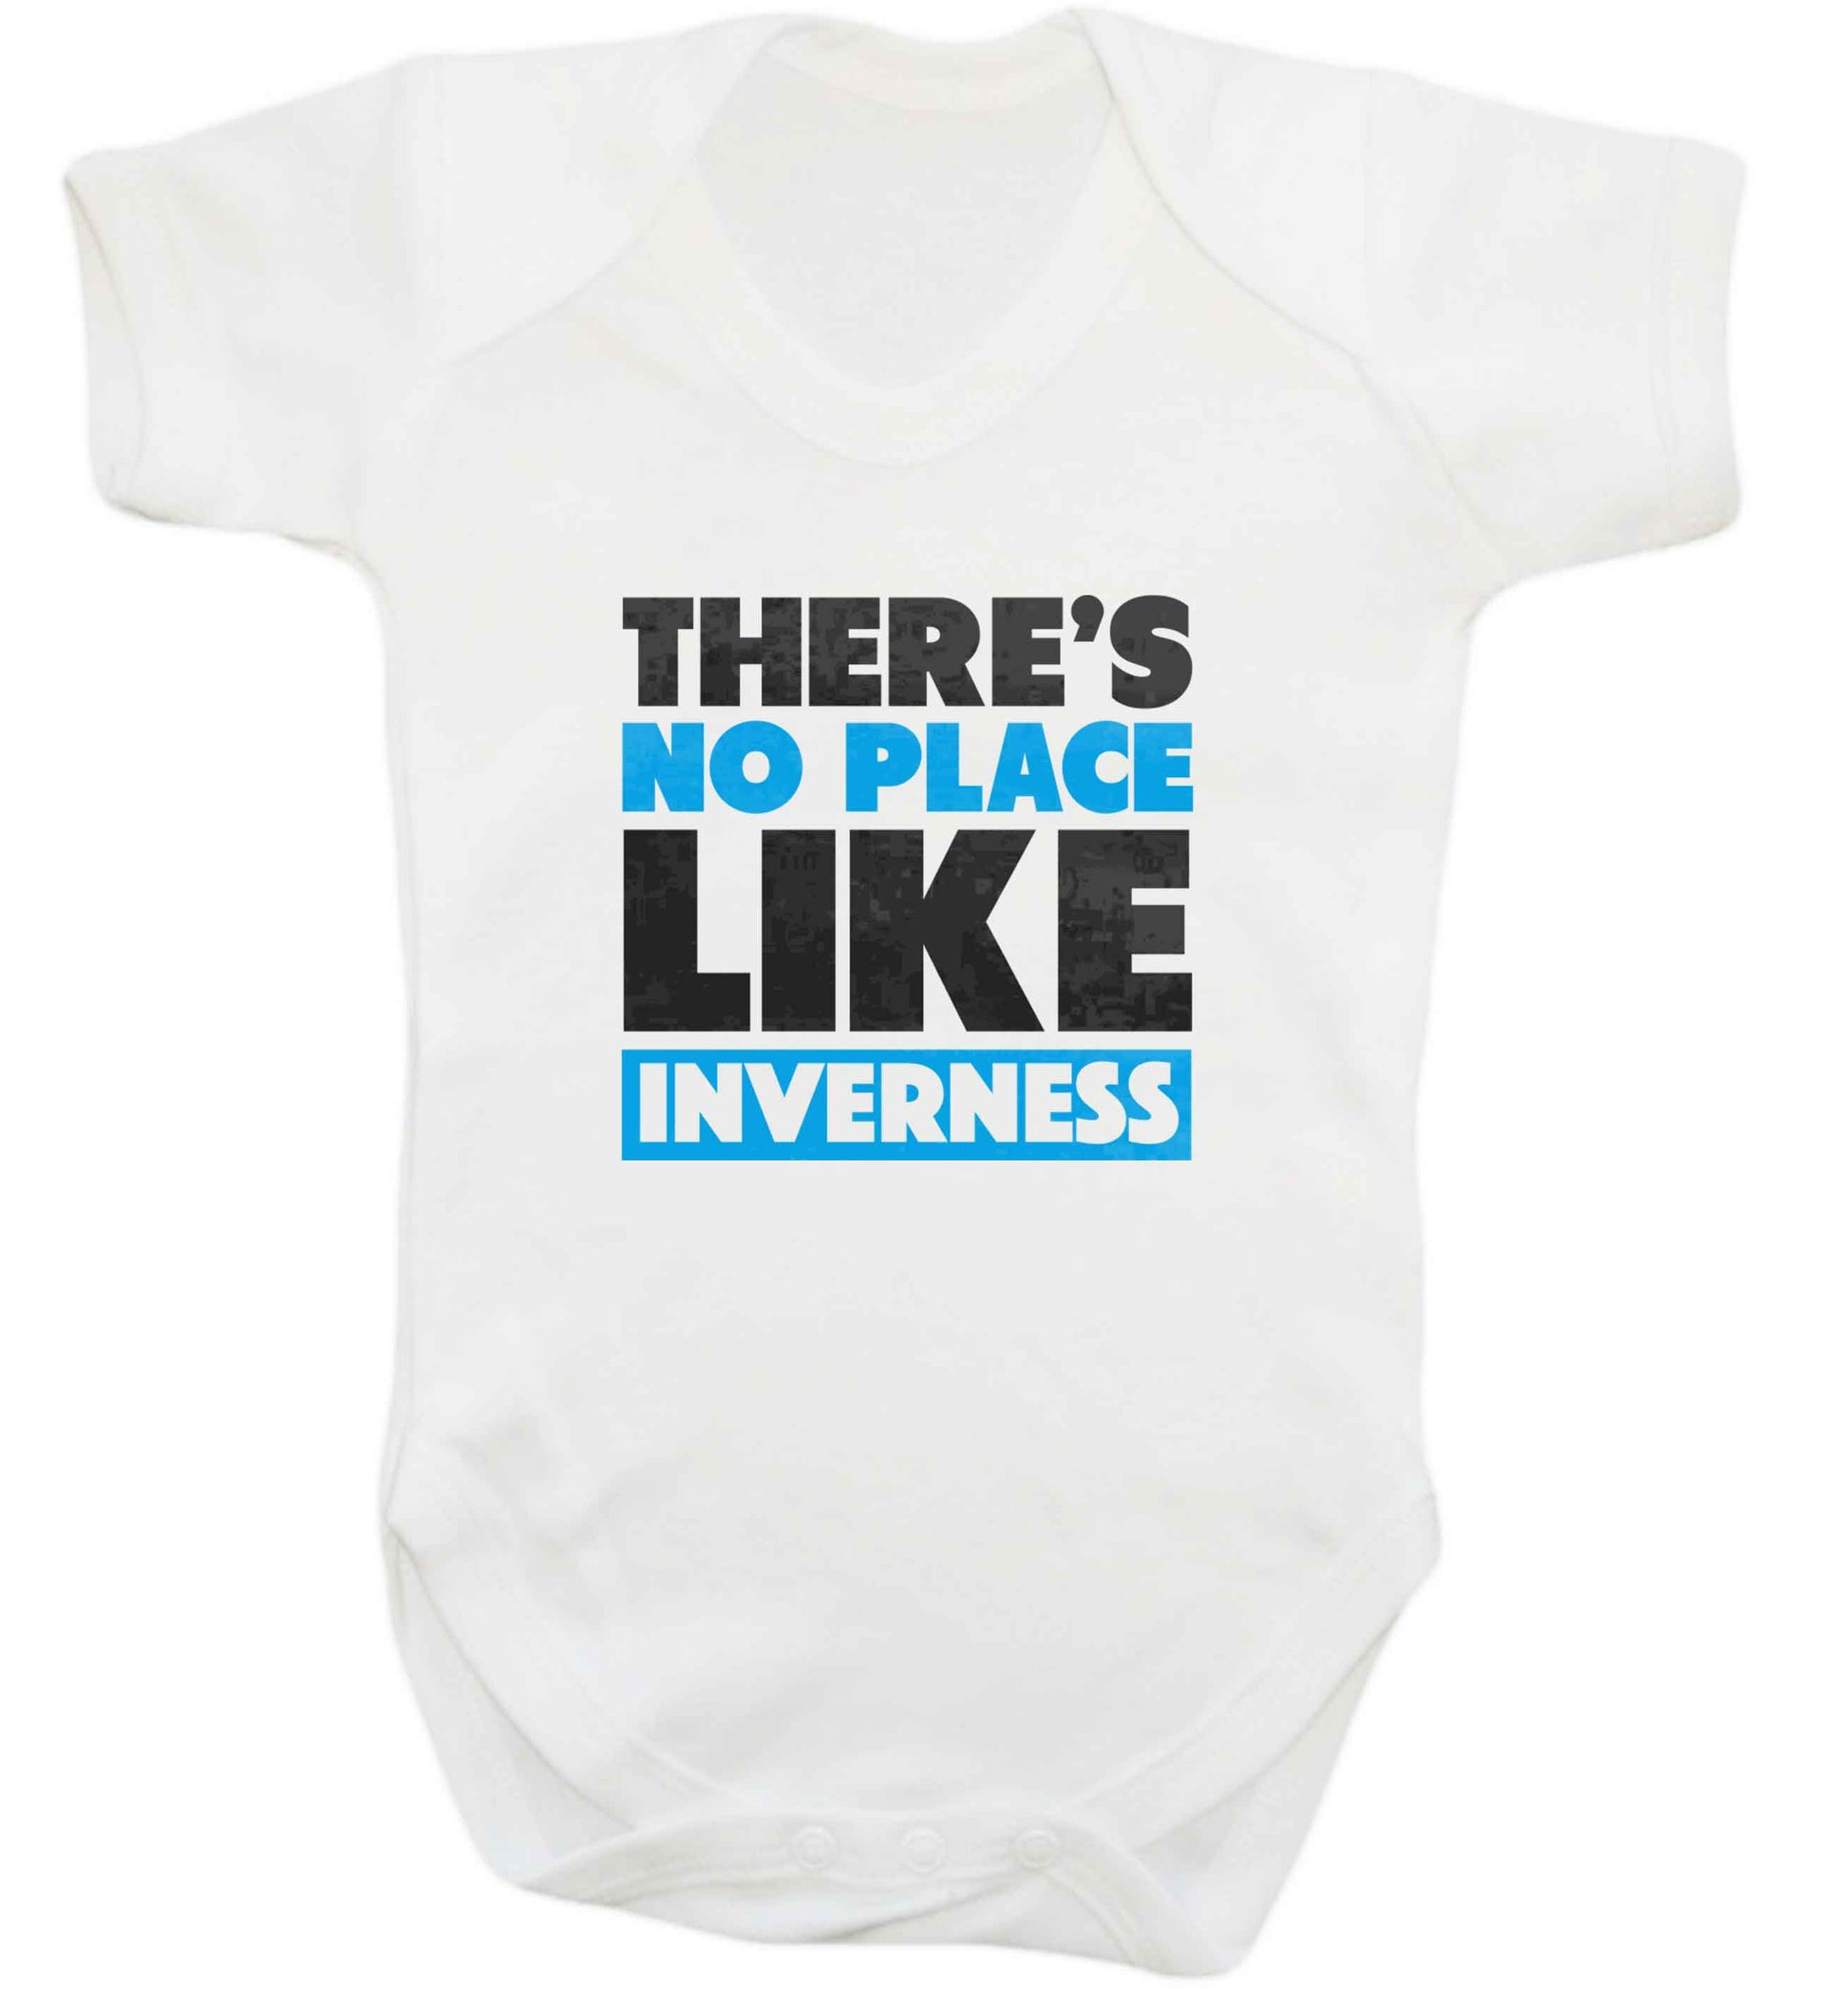 There's no place like Inverness baby vest white 18-24 months